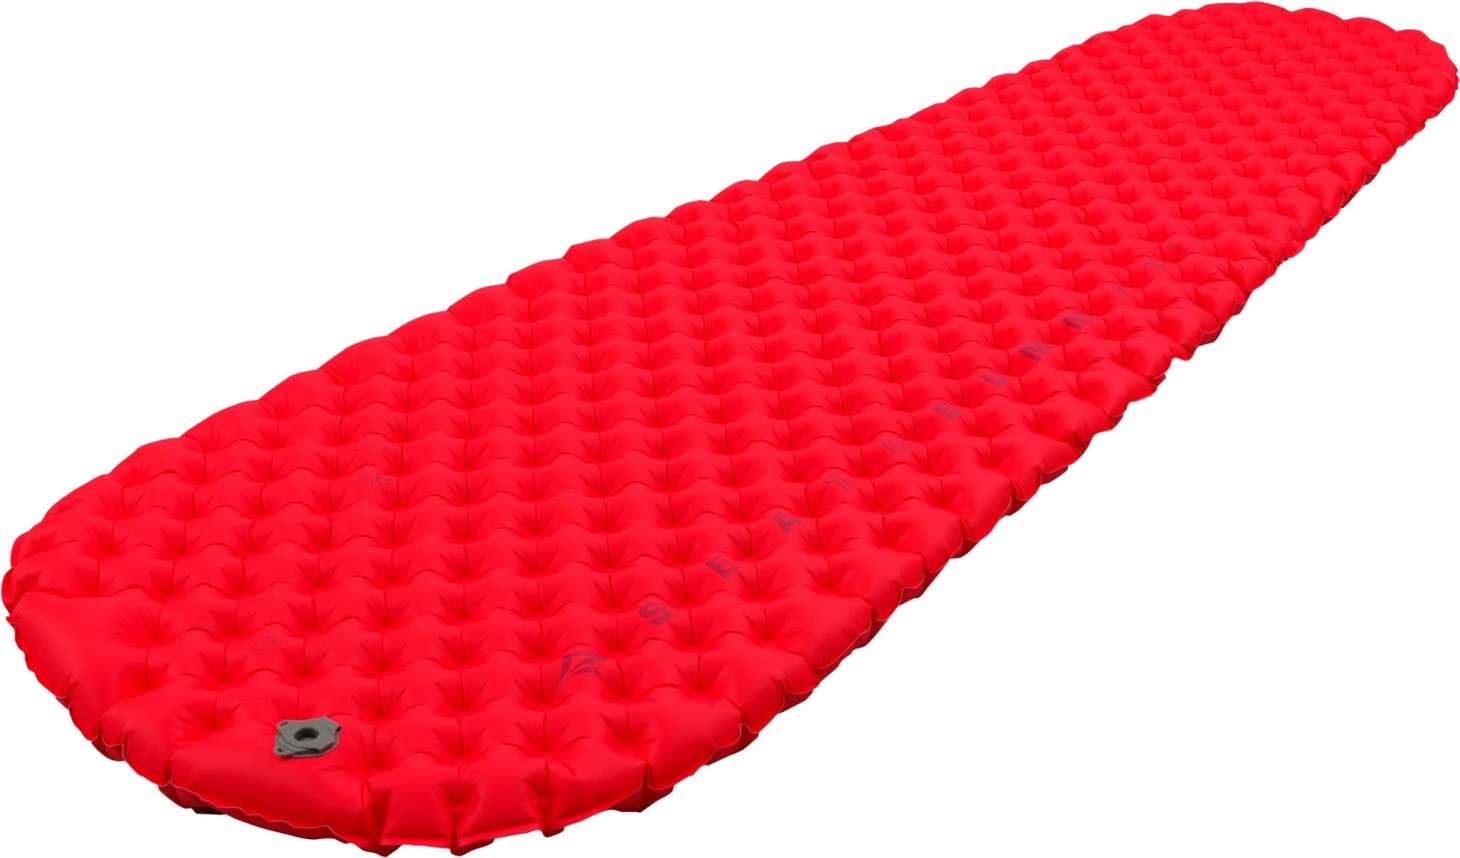 sea to summit sleeping pad, one of the best things to buy from REI